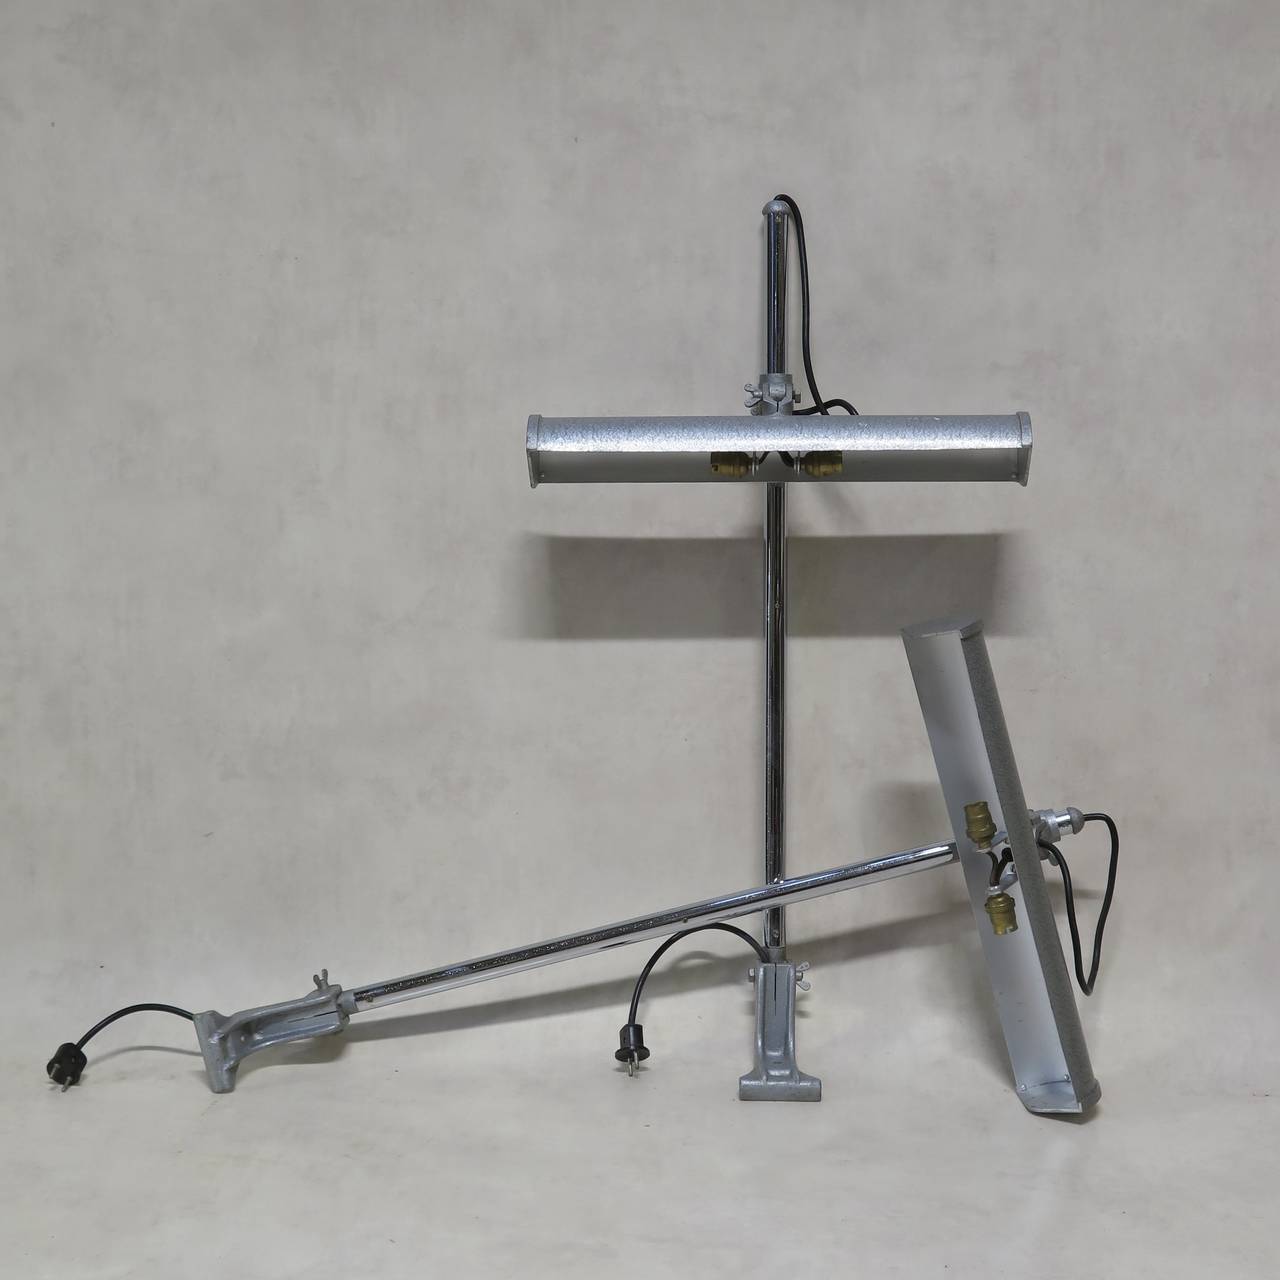 Pair of desk lamps with adjustable shades (height and angle), designed to be fixed to the edge of the table or work surface. The stems are chromed and the shades are painted in silver Industrial-quality hammer paint.